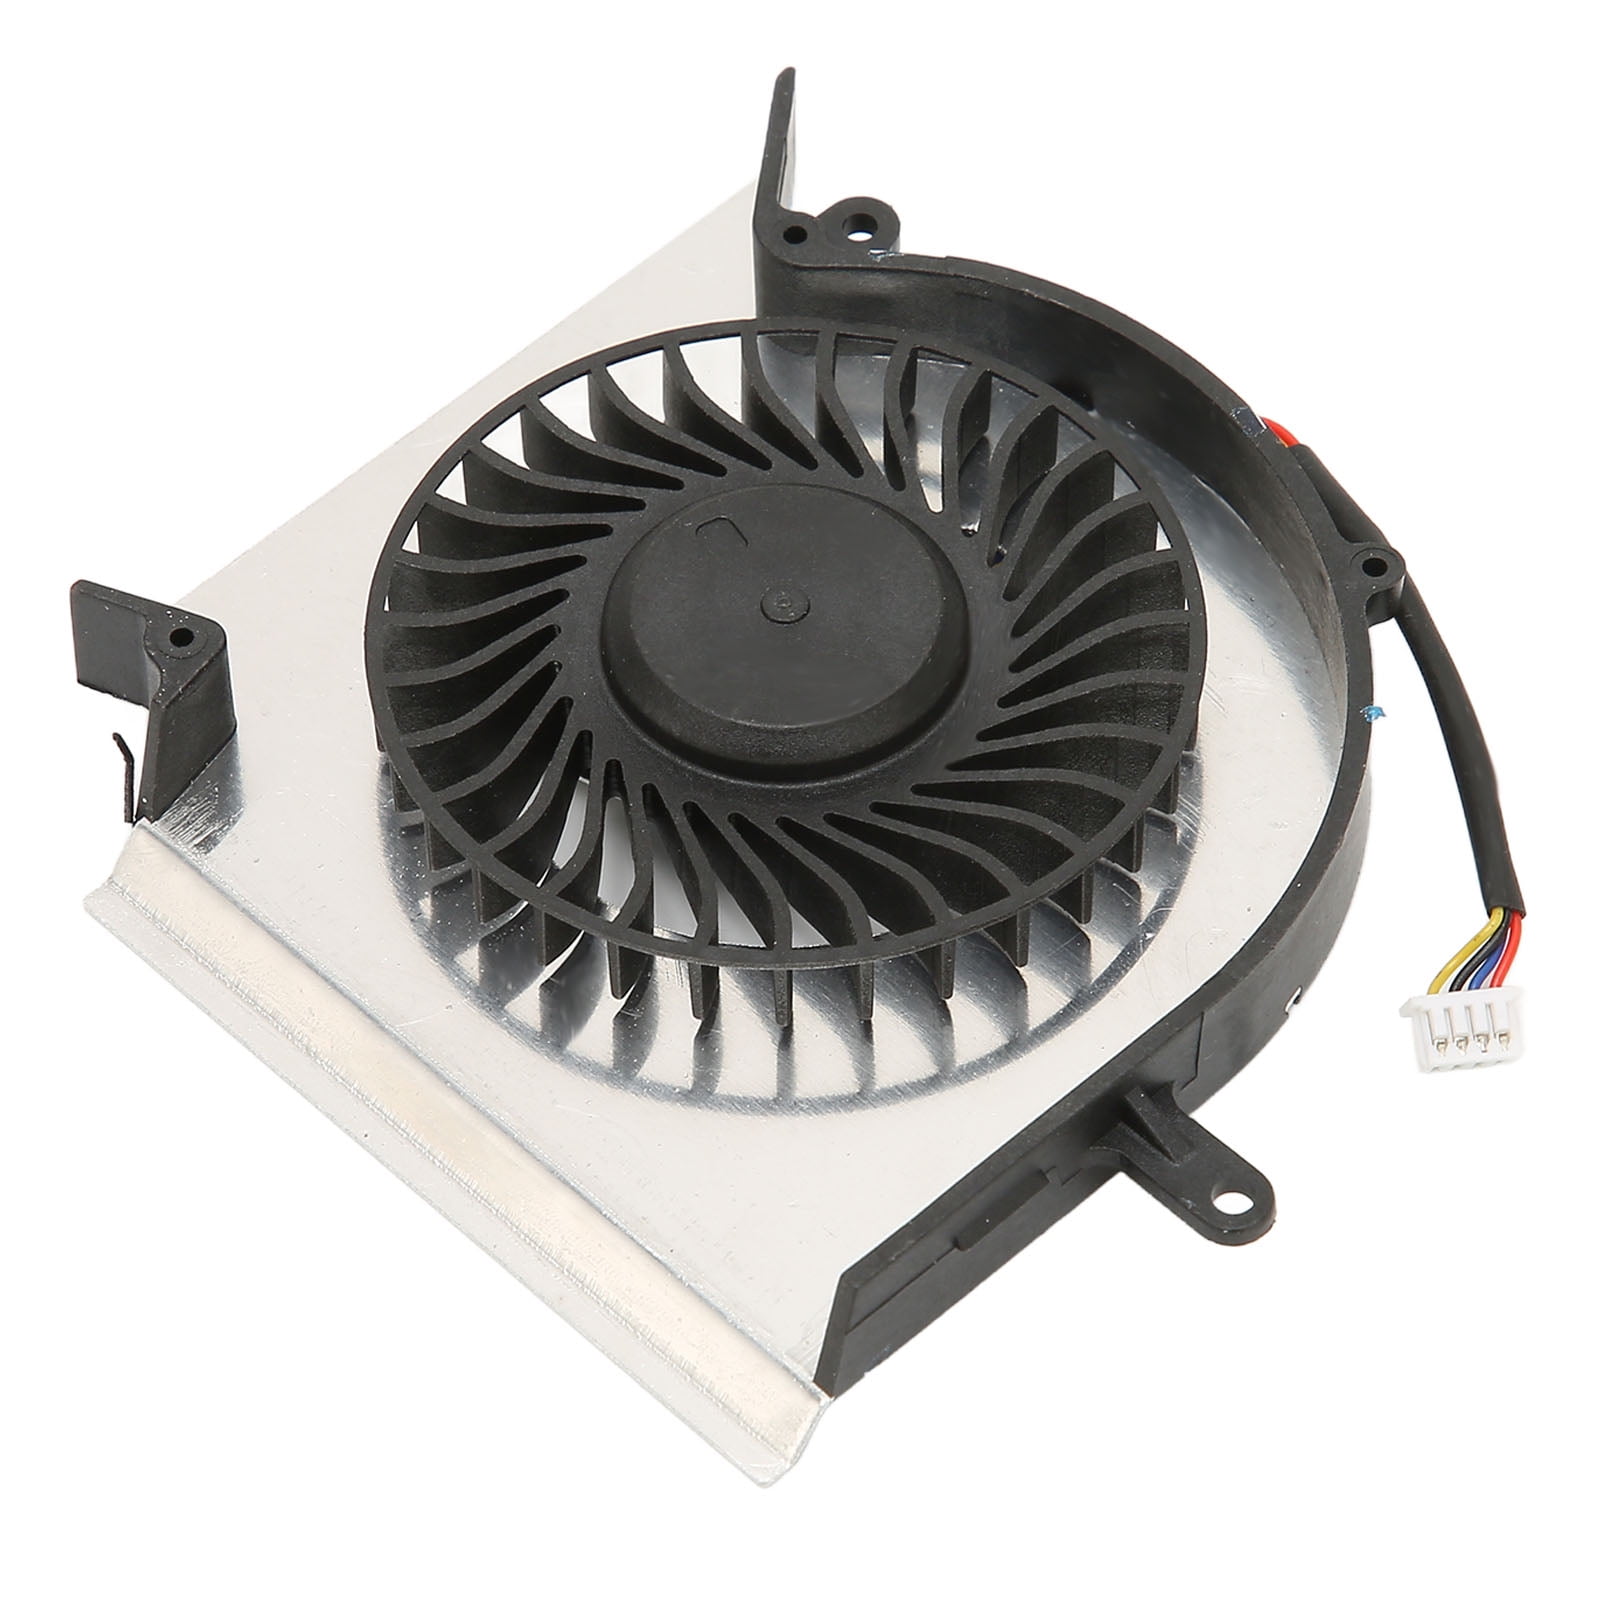 Replacement CPU GPU Cooling Fan for Asus ROG Zephyrus GU502DU GA502IU GA502IV 5V 0.5A 13NR03V0T02011 13NR0210T01111 13NR0210AM0901